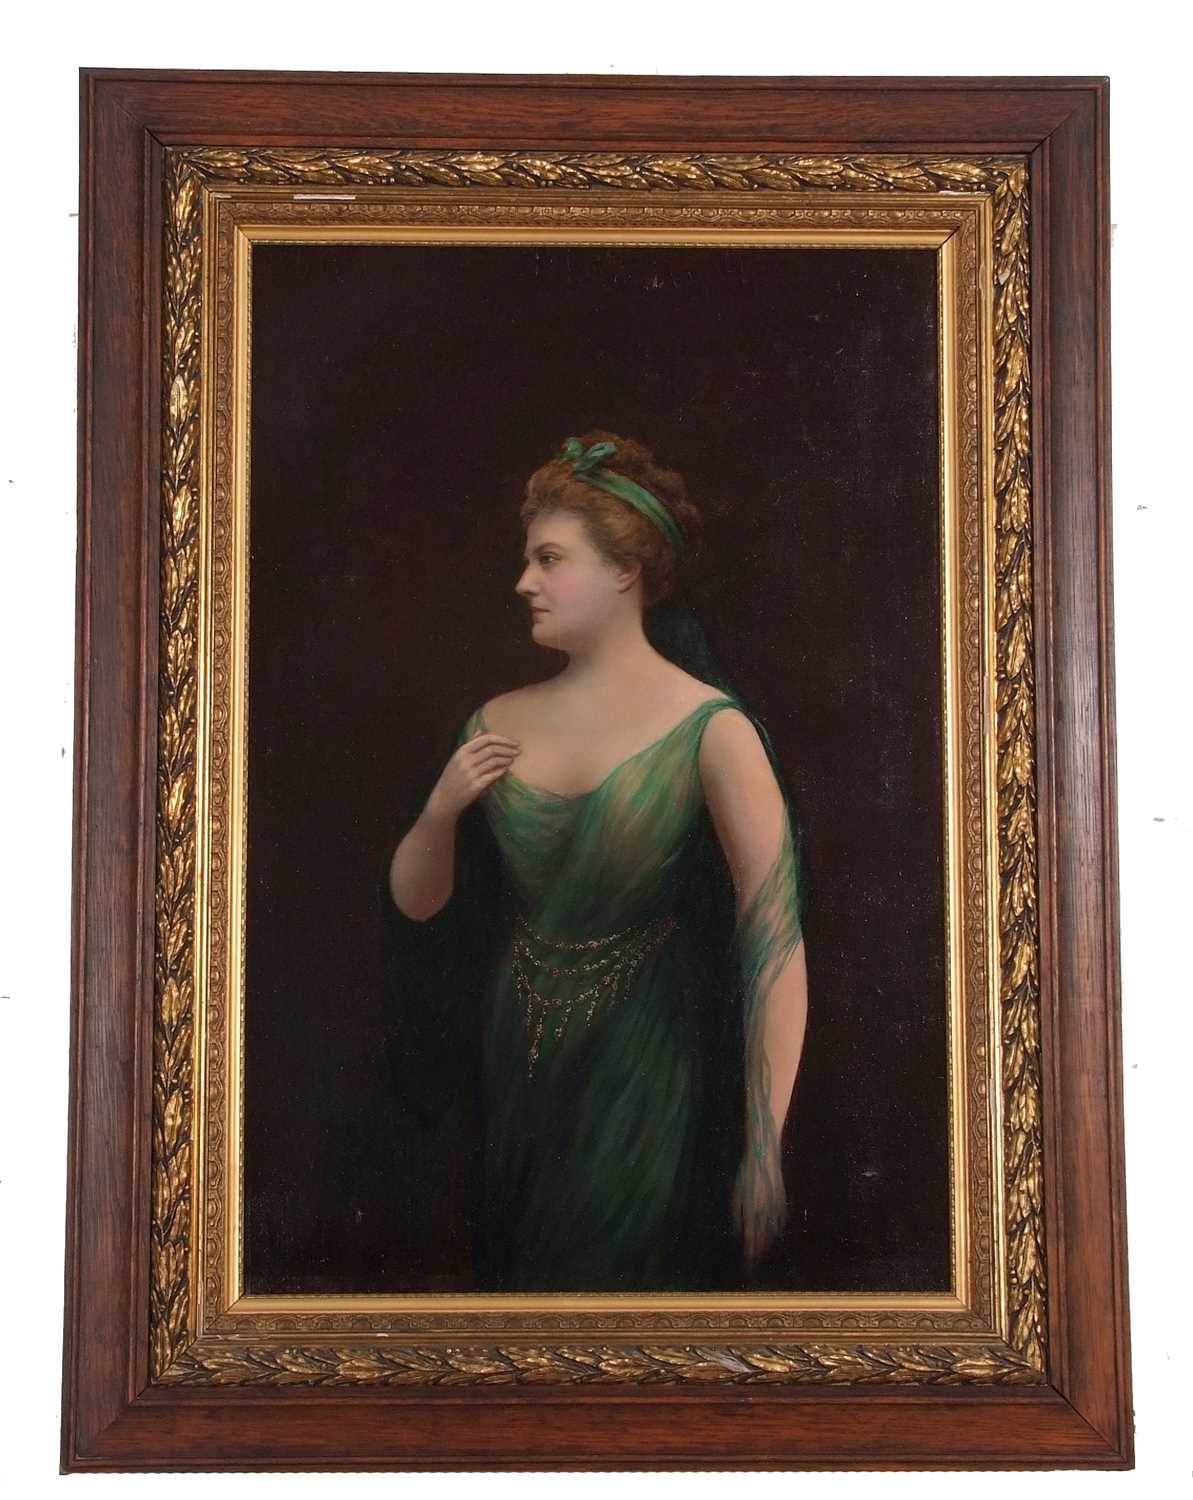 British School, early 19th century, portrait of a lady in a green dress, oil on canvas, unsigned, - Image 2 of 3